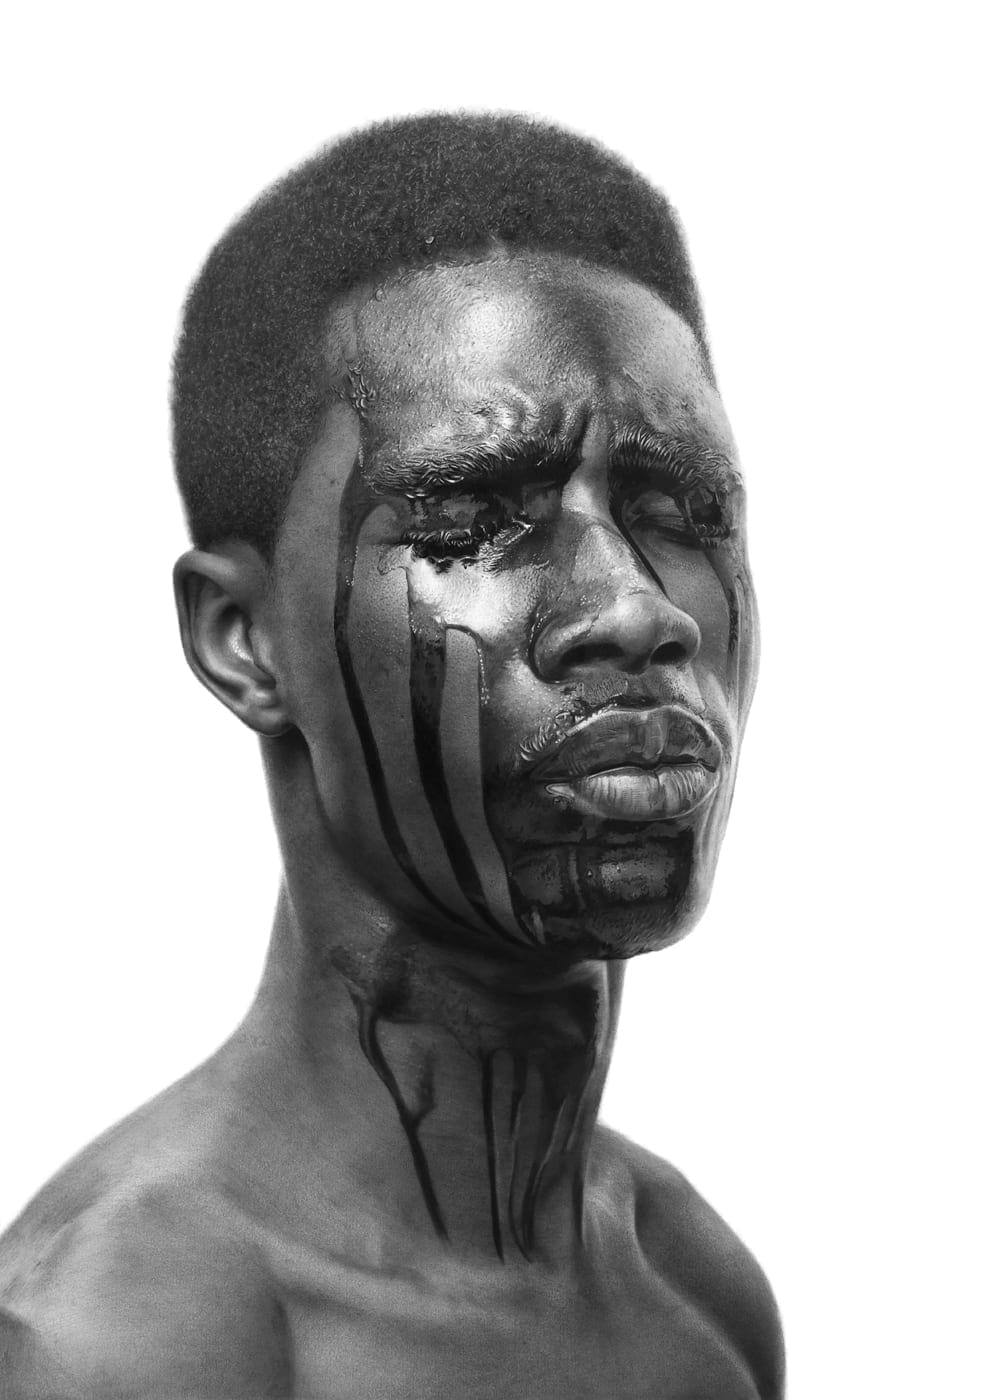 Arinze Stanley The Machine Man 6 Charcoal and graphite on paper 29.3 x 27.5